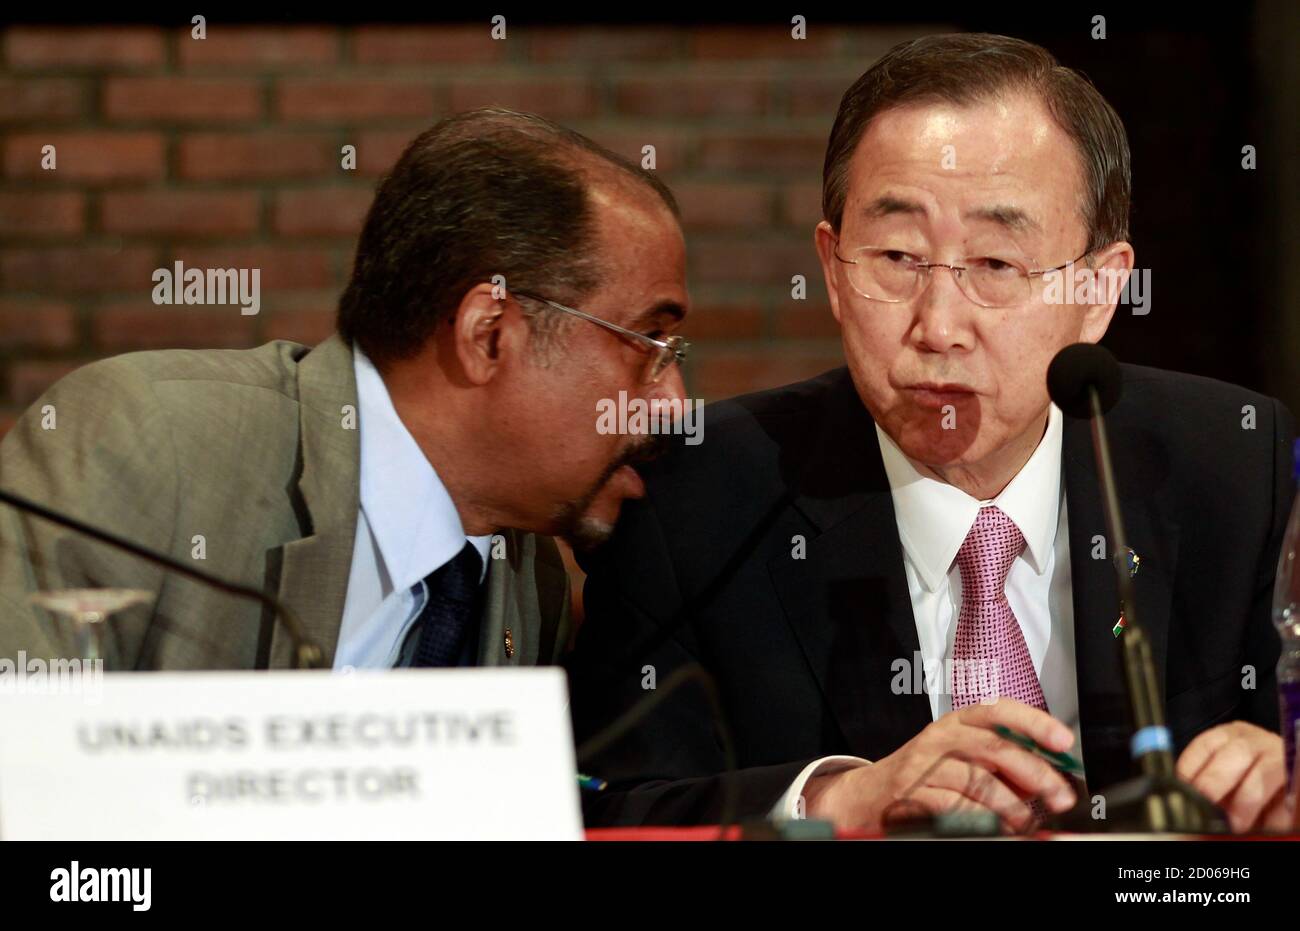 Joint United Nations Programme on HIV/AIDS (UNAIDS) Executive Director Michel Sidibe (L) talks to U.N. Secretary General Ban Ki-moon during a news conference in Kenya's capital Nairobi, March 31, 2011, after outlining new recommendations to reach the 2015 goals for the AIDS epidemic response. Discrimination, stigma and gender inequality are threatening to undermine progress in the fight against HIV/AIDS, 30 years after the deadly virus took its first toll, the U.N. chief said on Thursday. REUTERS/Thomas Mukoya (KENYA - Tags: POLITICS HEALTH) Stock Photo